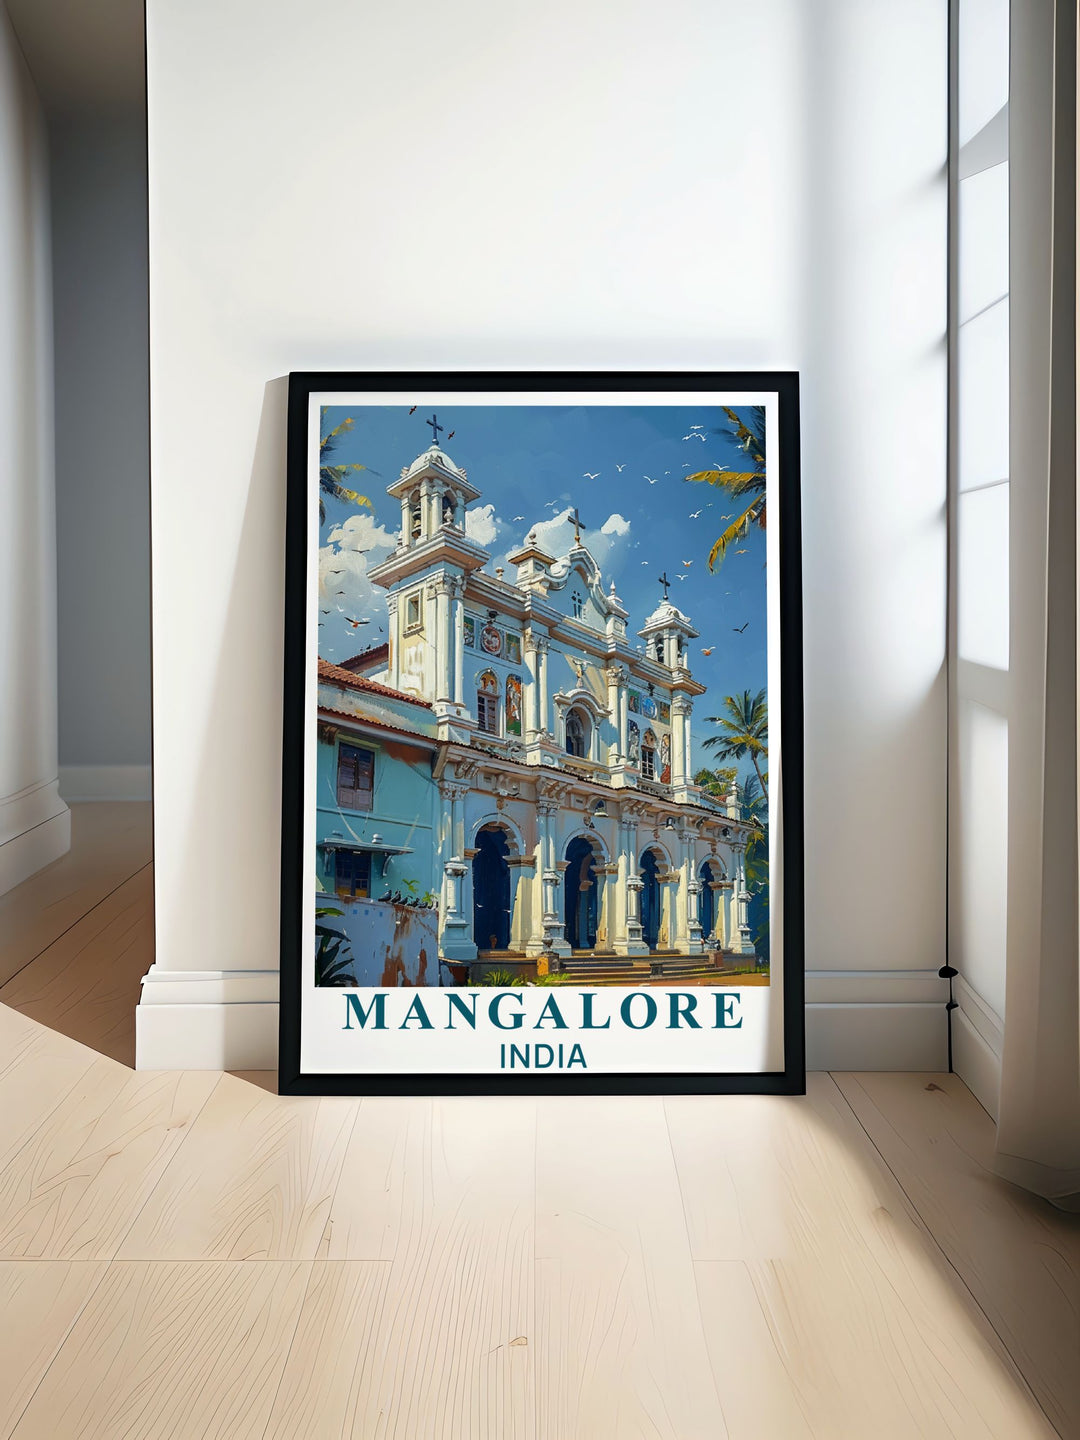 The picturesque St. Aloysius Chapel and the lively streets of Mangalore are depicted in this detailed travel poster, ideal for bringing a piece of Karnatakas coastal and cultural richness into your home.